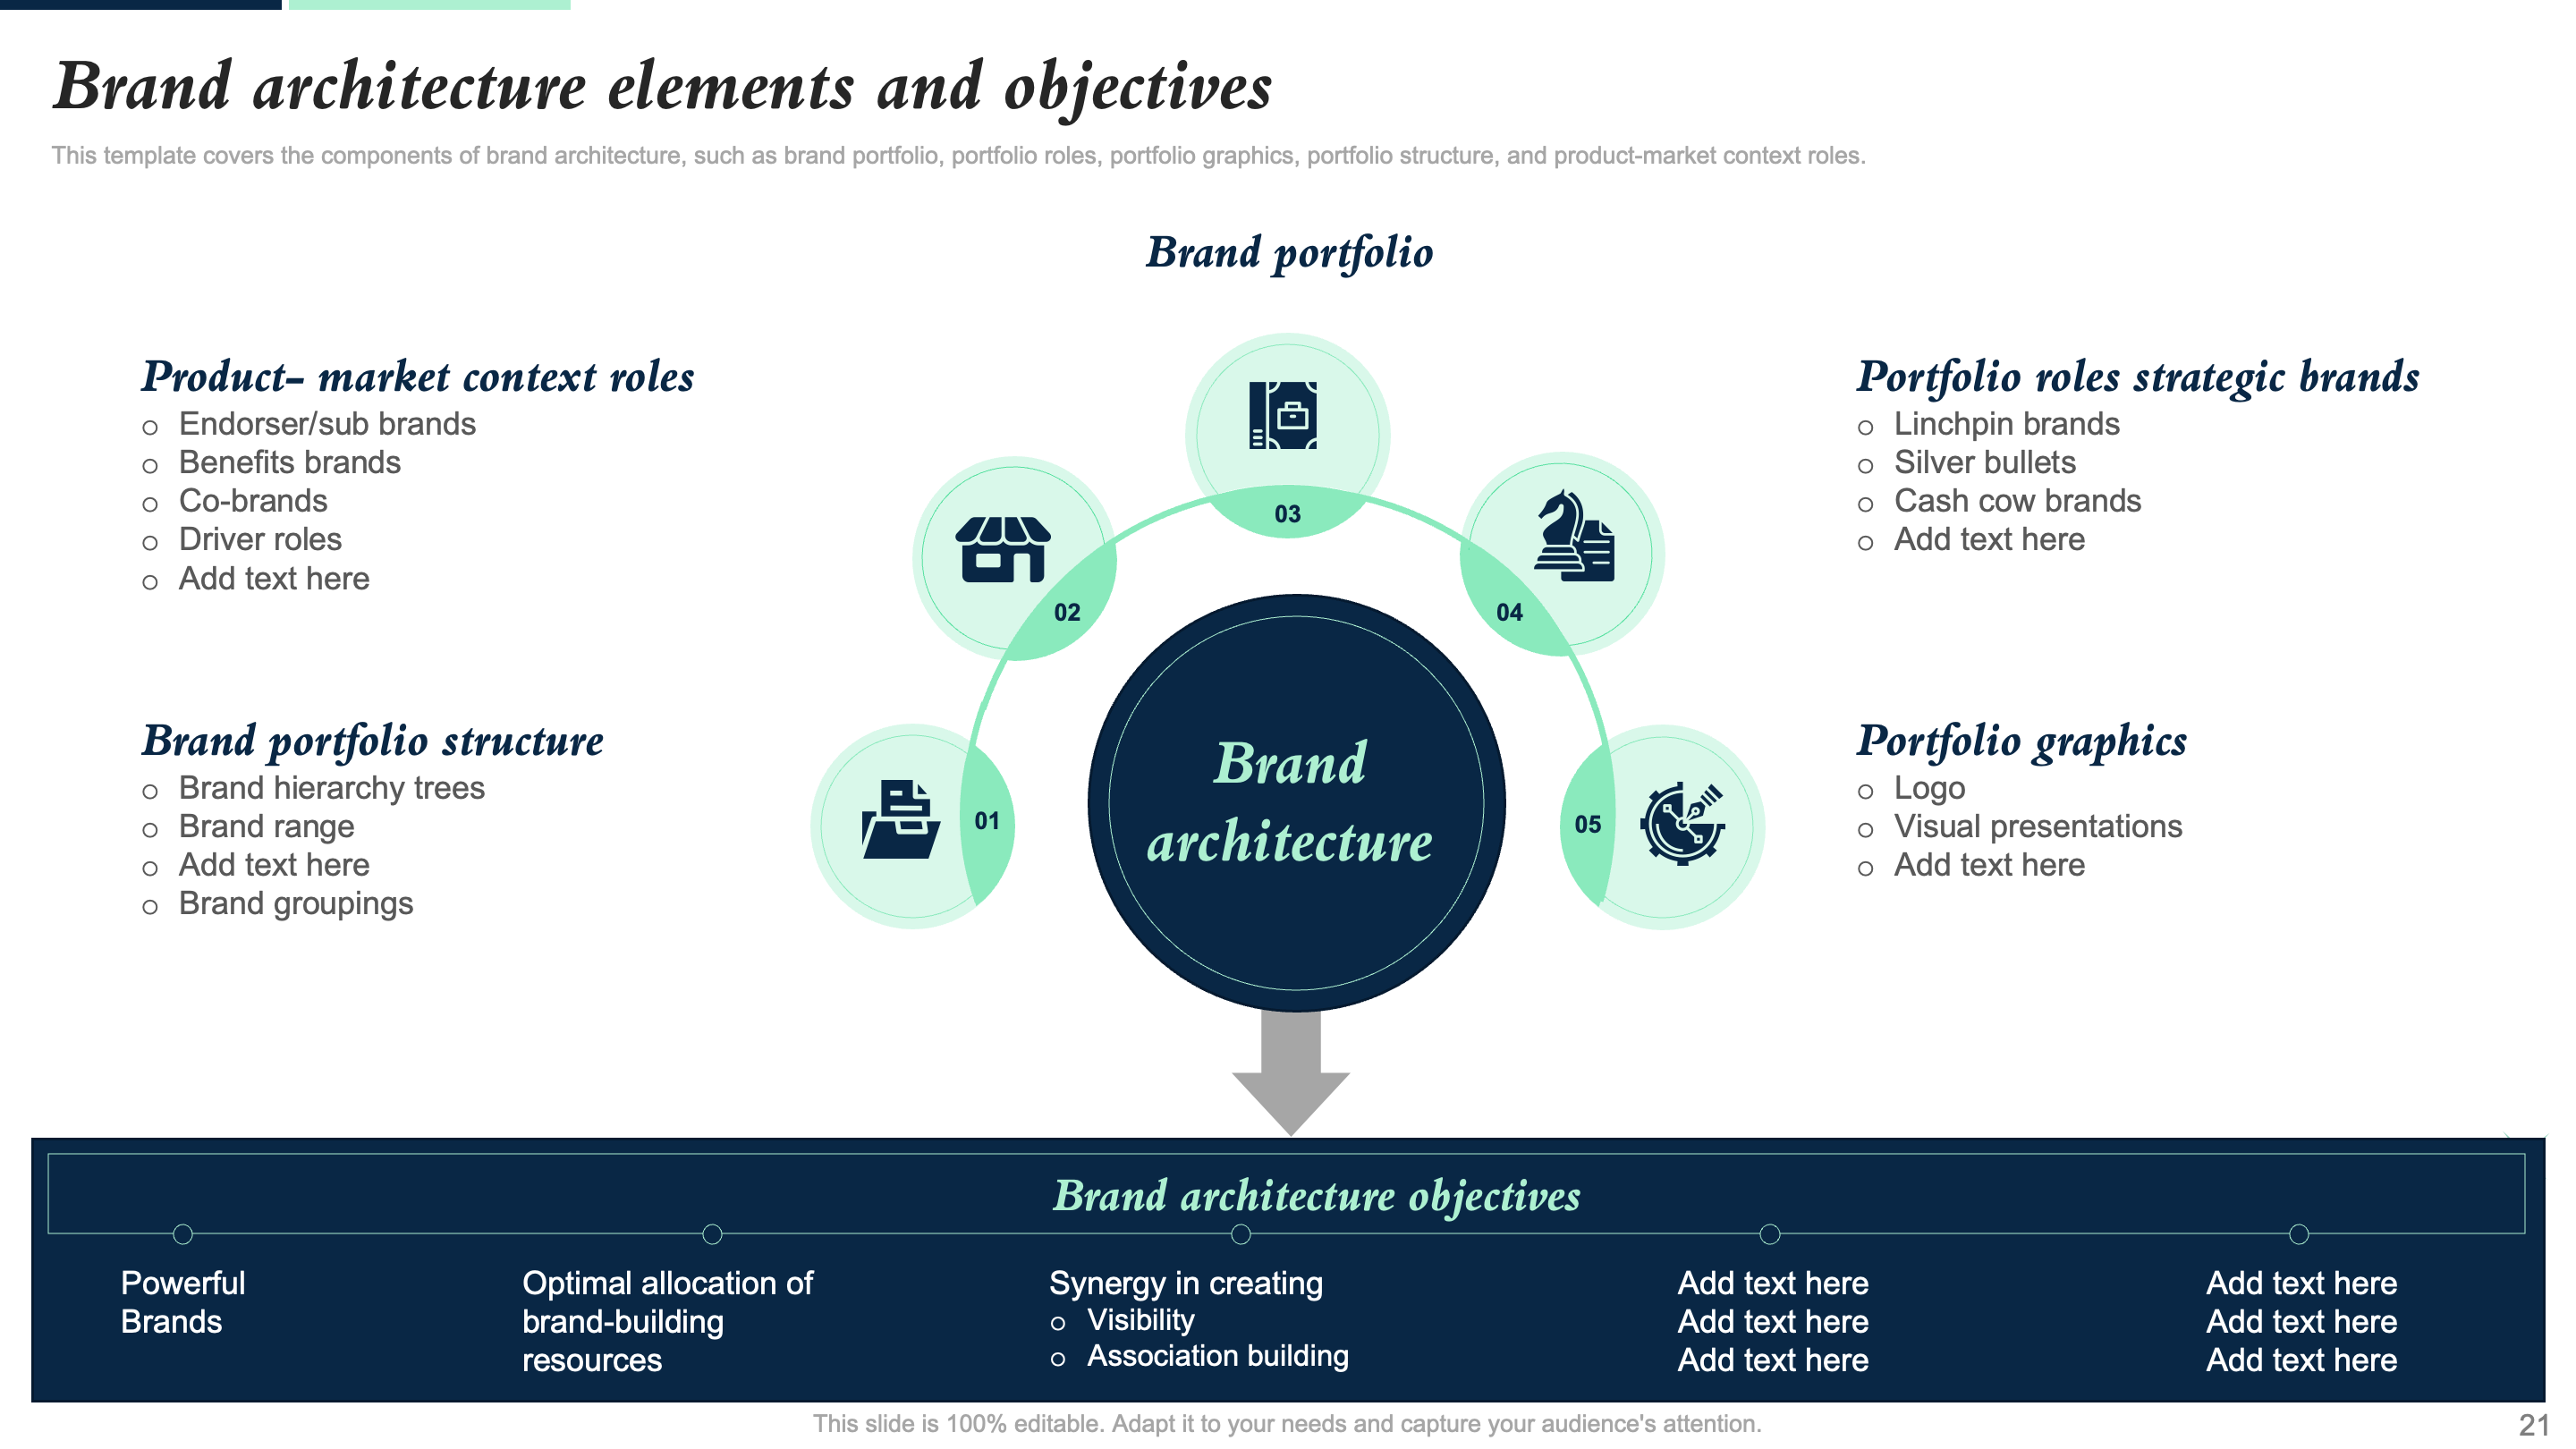 Brand Architecture Elements and Objectives